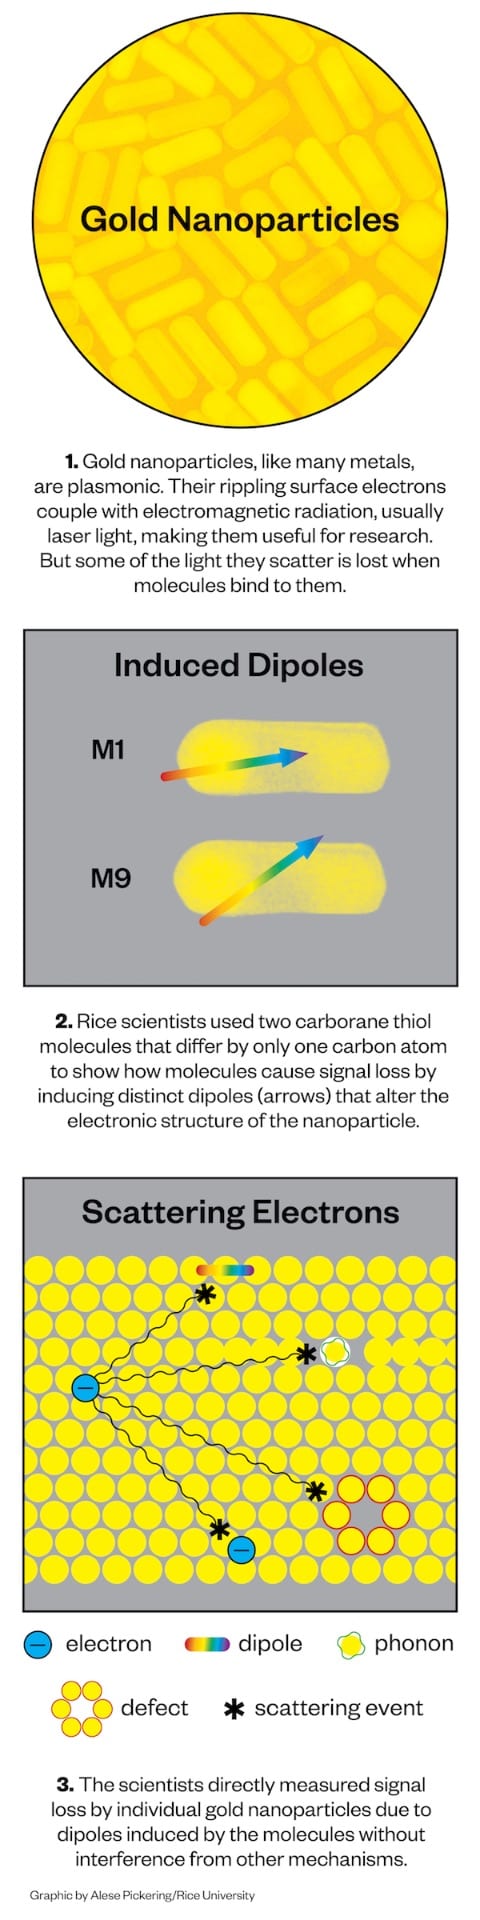 Illustration shows how scientists measure signal loss by plasmonic gold nanoparticles by attaching molecules that create damping on the surface.